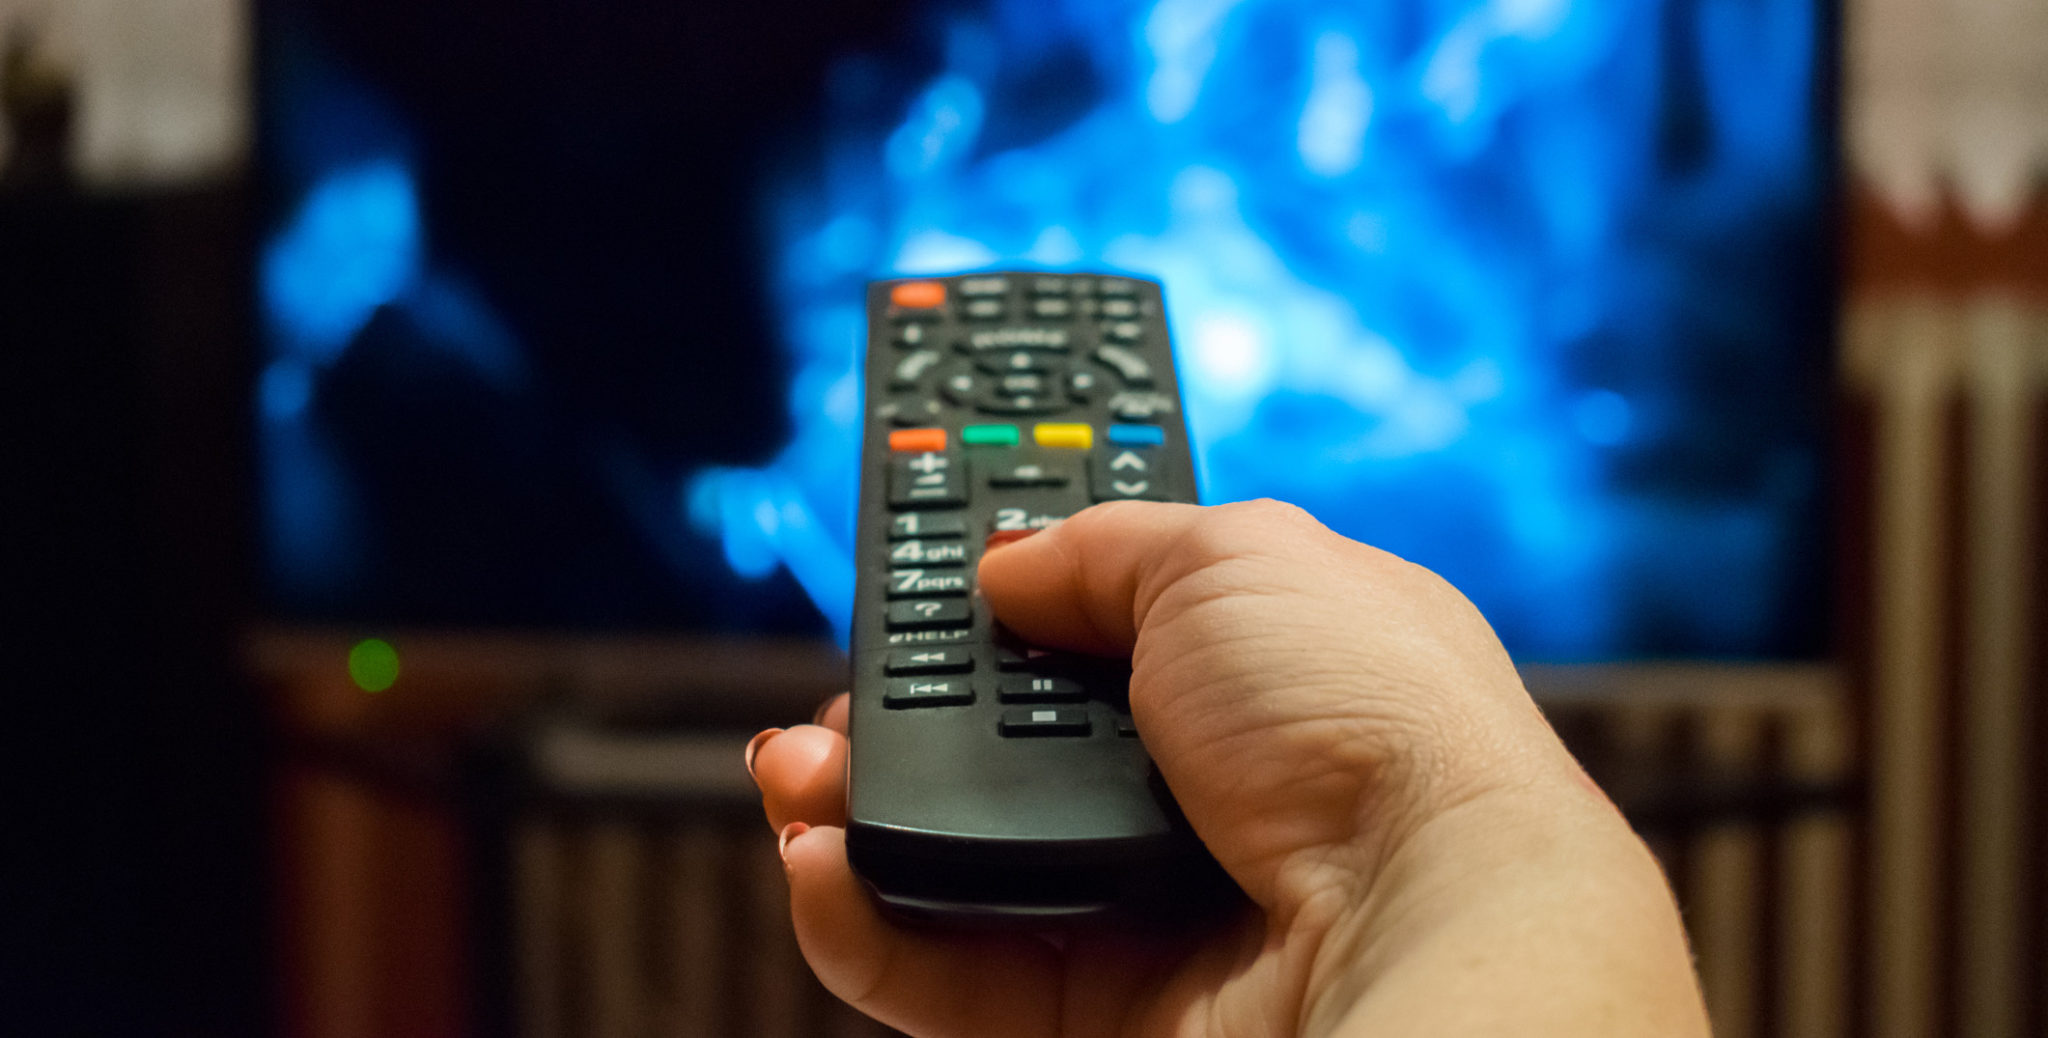 Analyst: The Number of OTT Services in the US Has More Than Doubled Since 2014